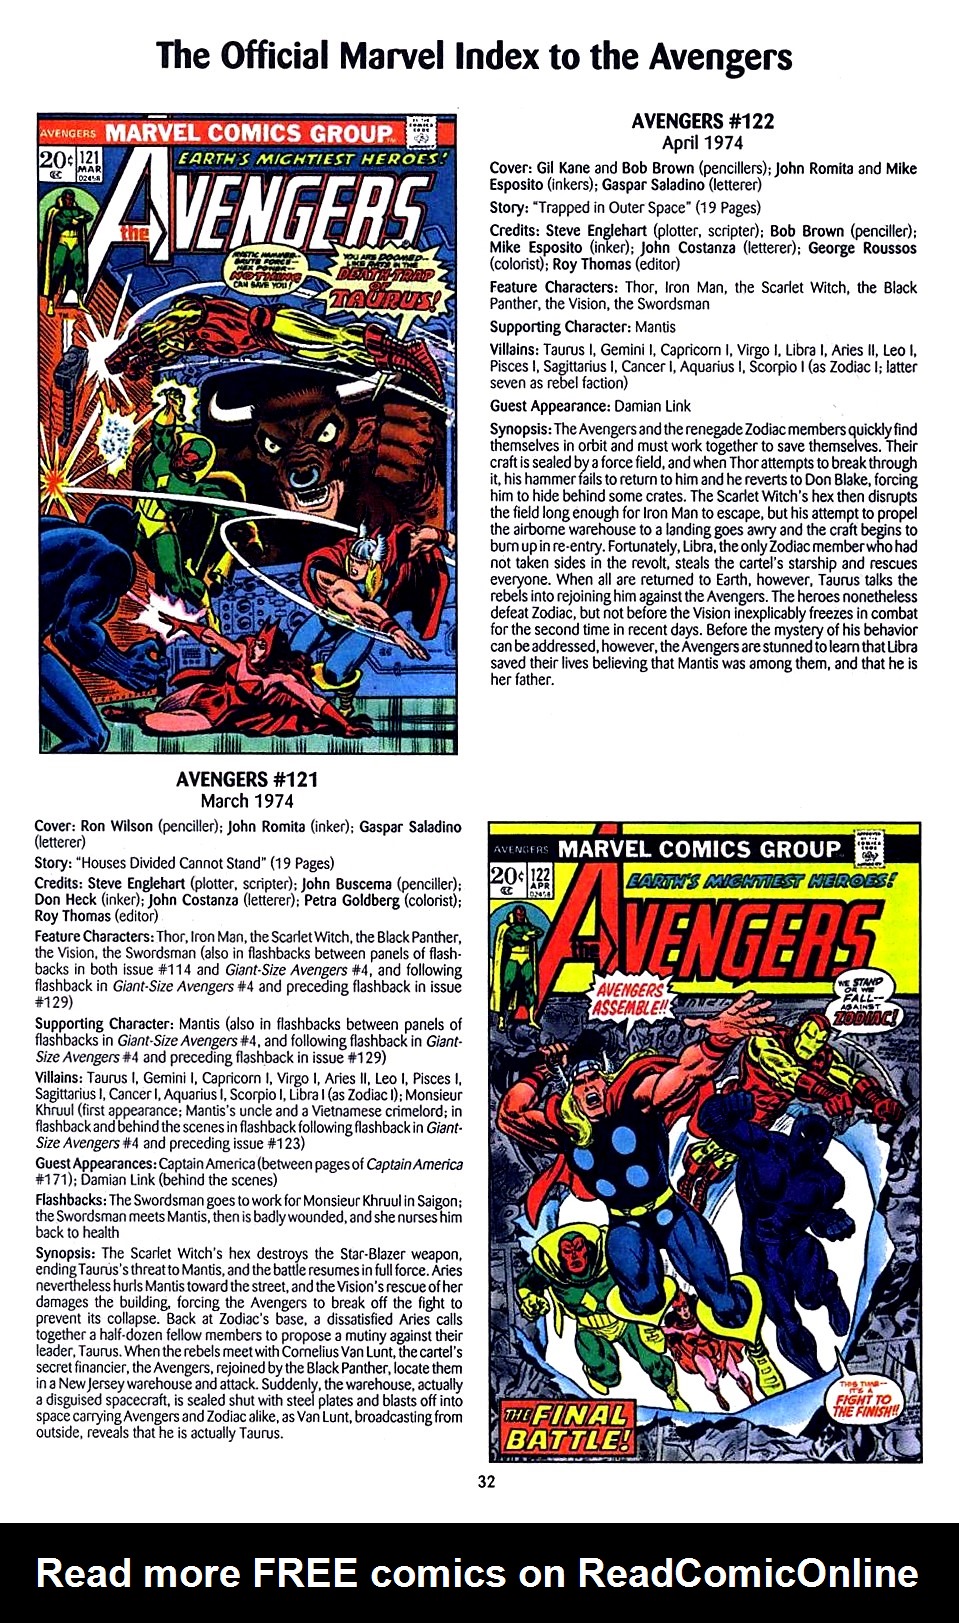 Read online The Official Marvel Index to the Avengers comic -  Issue #2 - 34